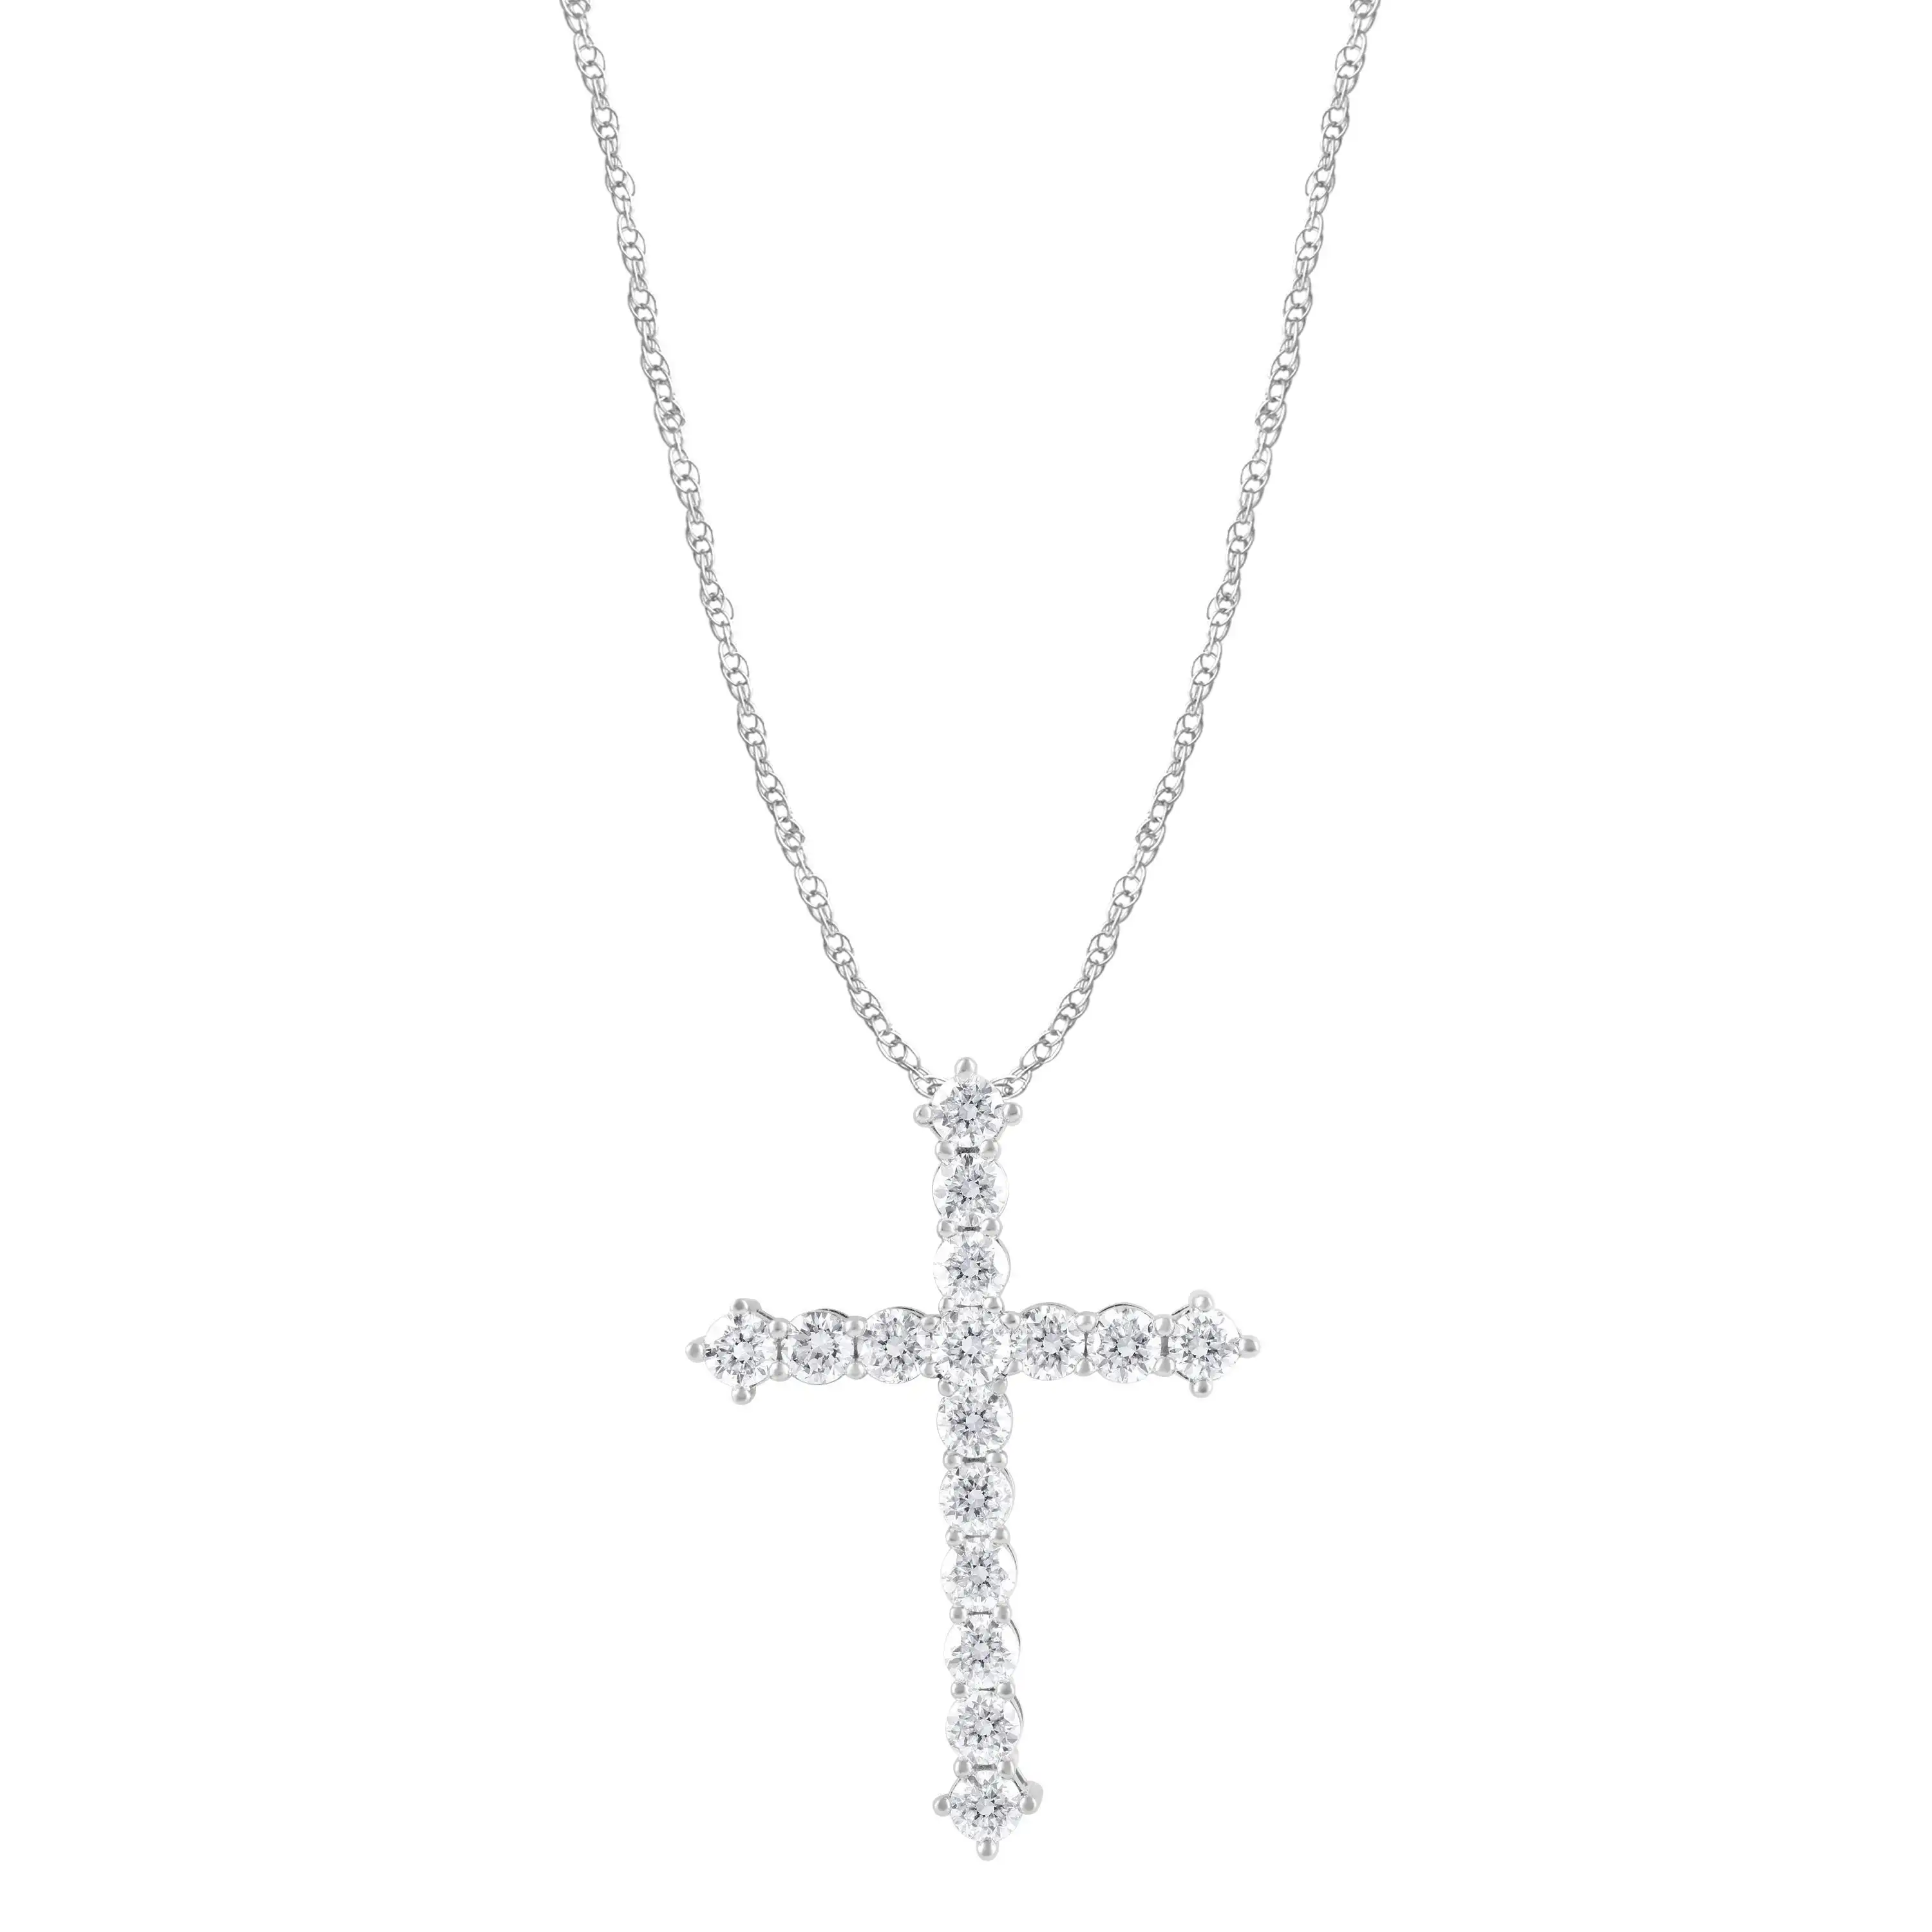 Meera Cross Necklace with 1.00ct of Laboratory Grown Diamonds in 9ct White Gold